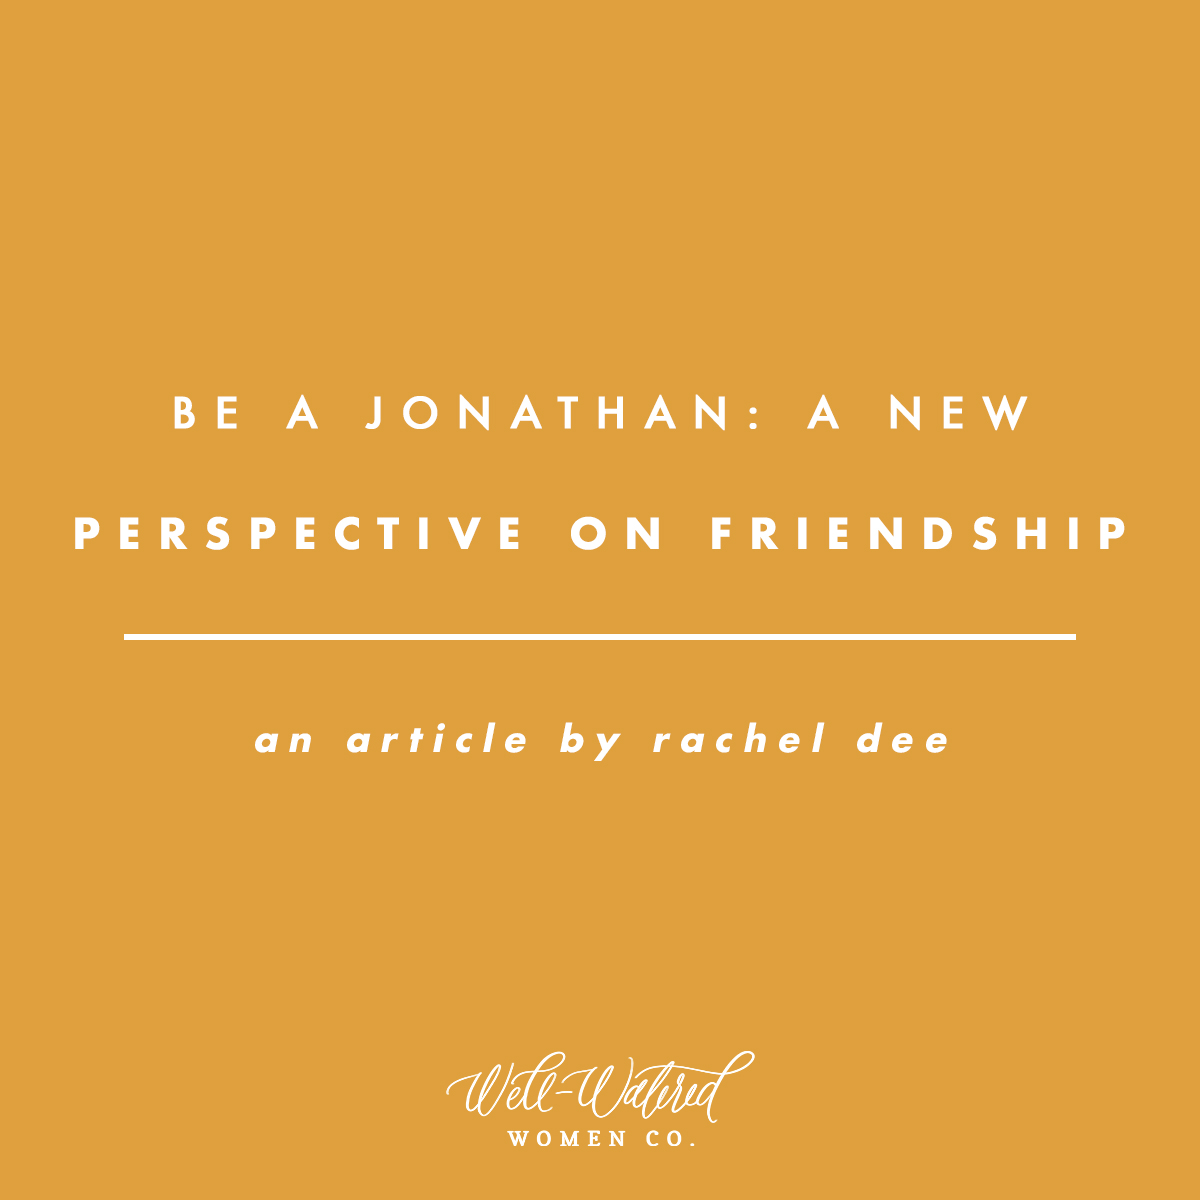 Be a Jonathan - on Friendship | Well-Watered Women Articles